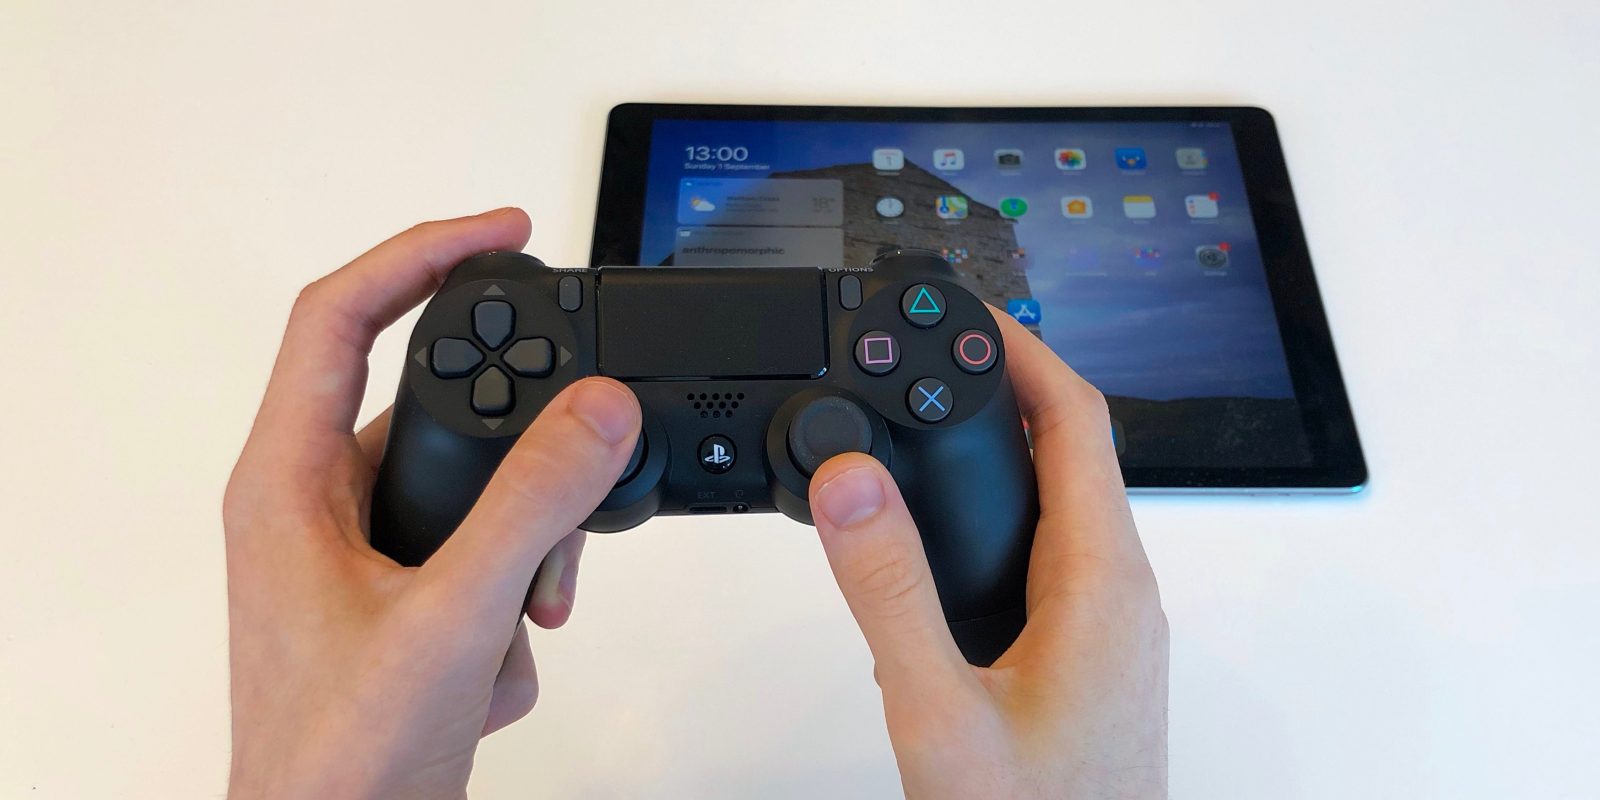 How to connect PlayStation controller or Xbox controller to and iPad